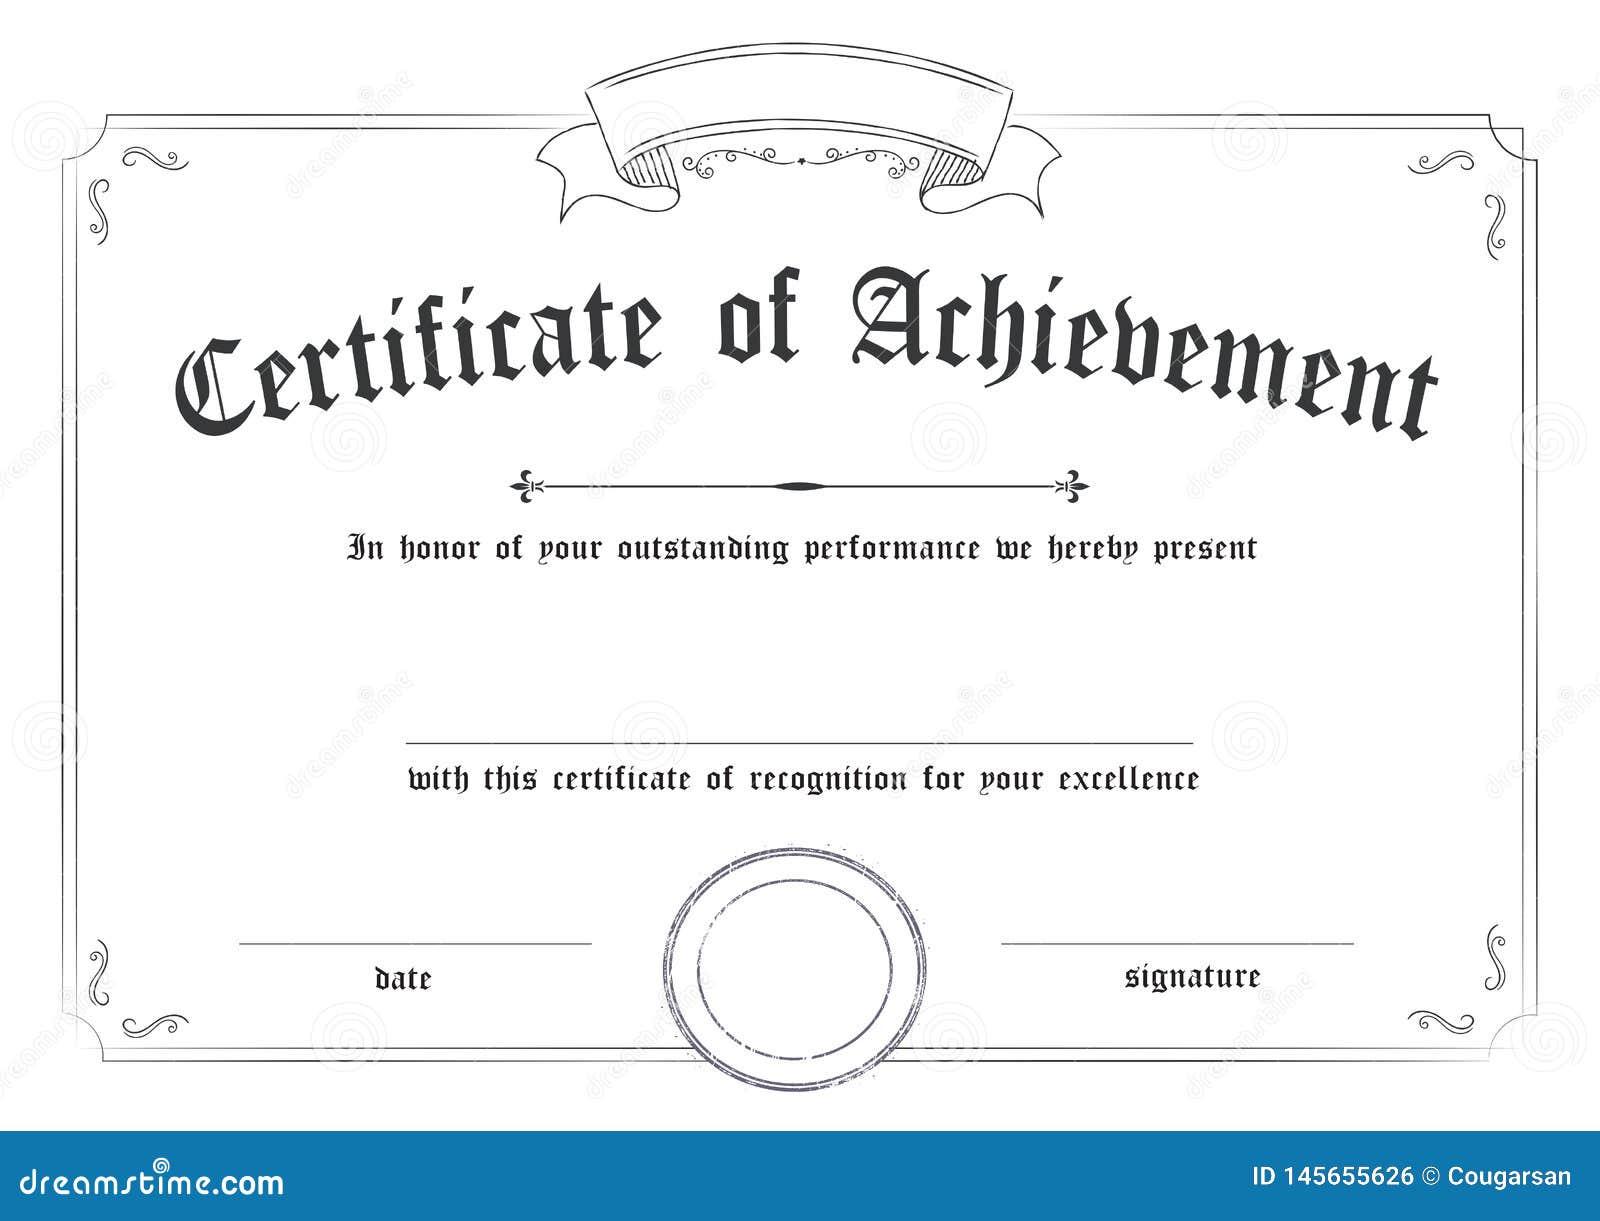 Horizontal Classic Certificate of Achievement Paper Template For Free Certificate Of Excellence Template